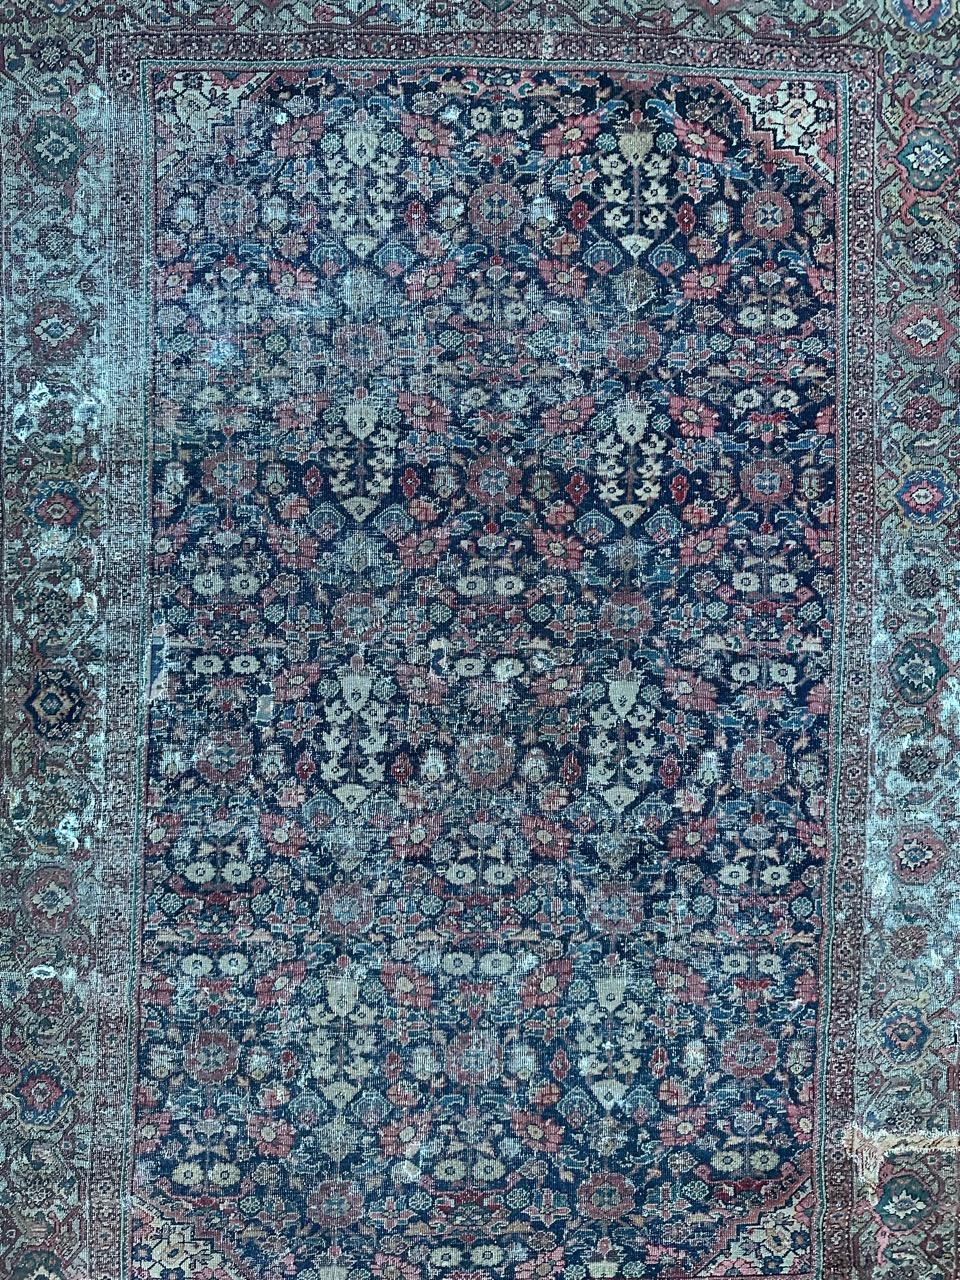 Exquisite late 19th-century distressed Farahan rug featuring a captivating « Herati » design with stylized flowers on a rich navy blue field. Despite some wear and minor damages, this piece is a testament to meticulous craftsmanship, entirely